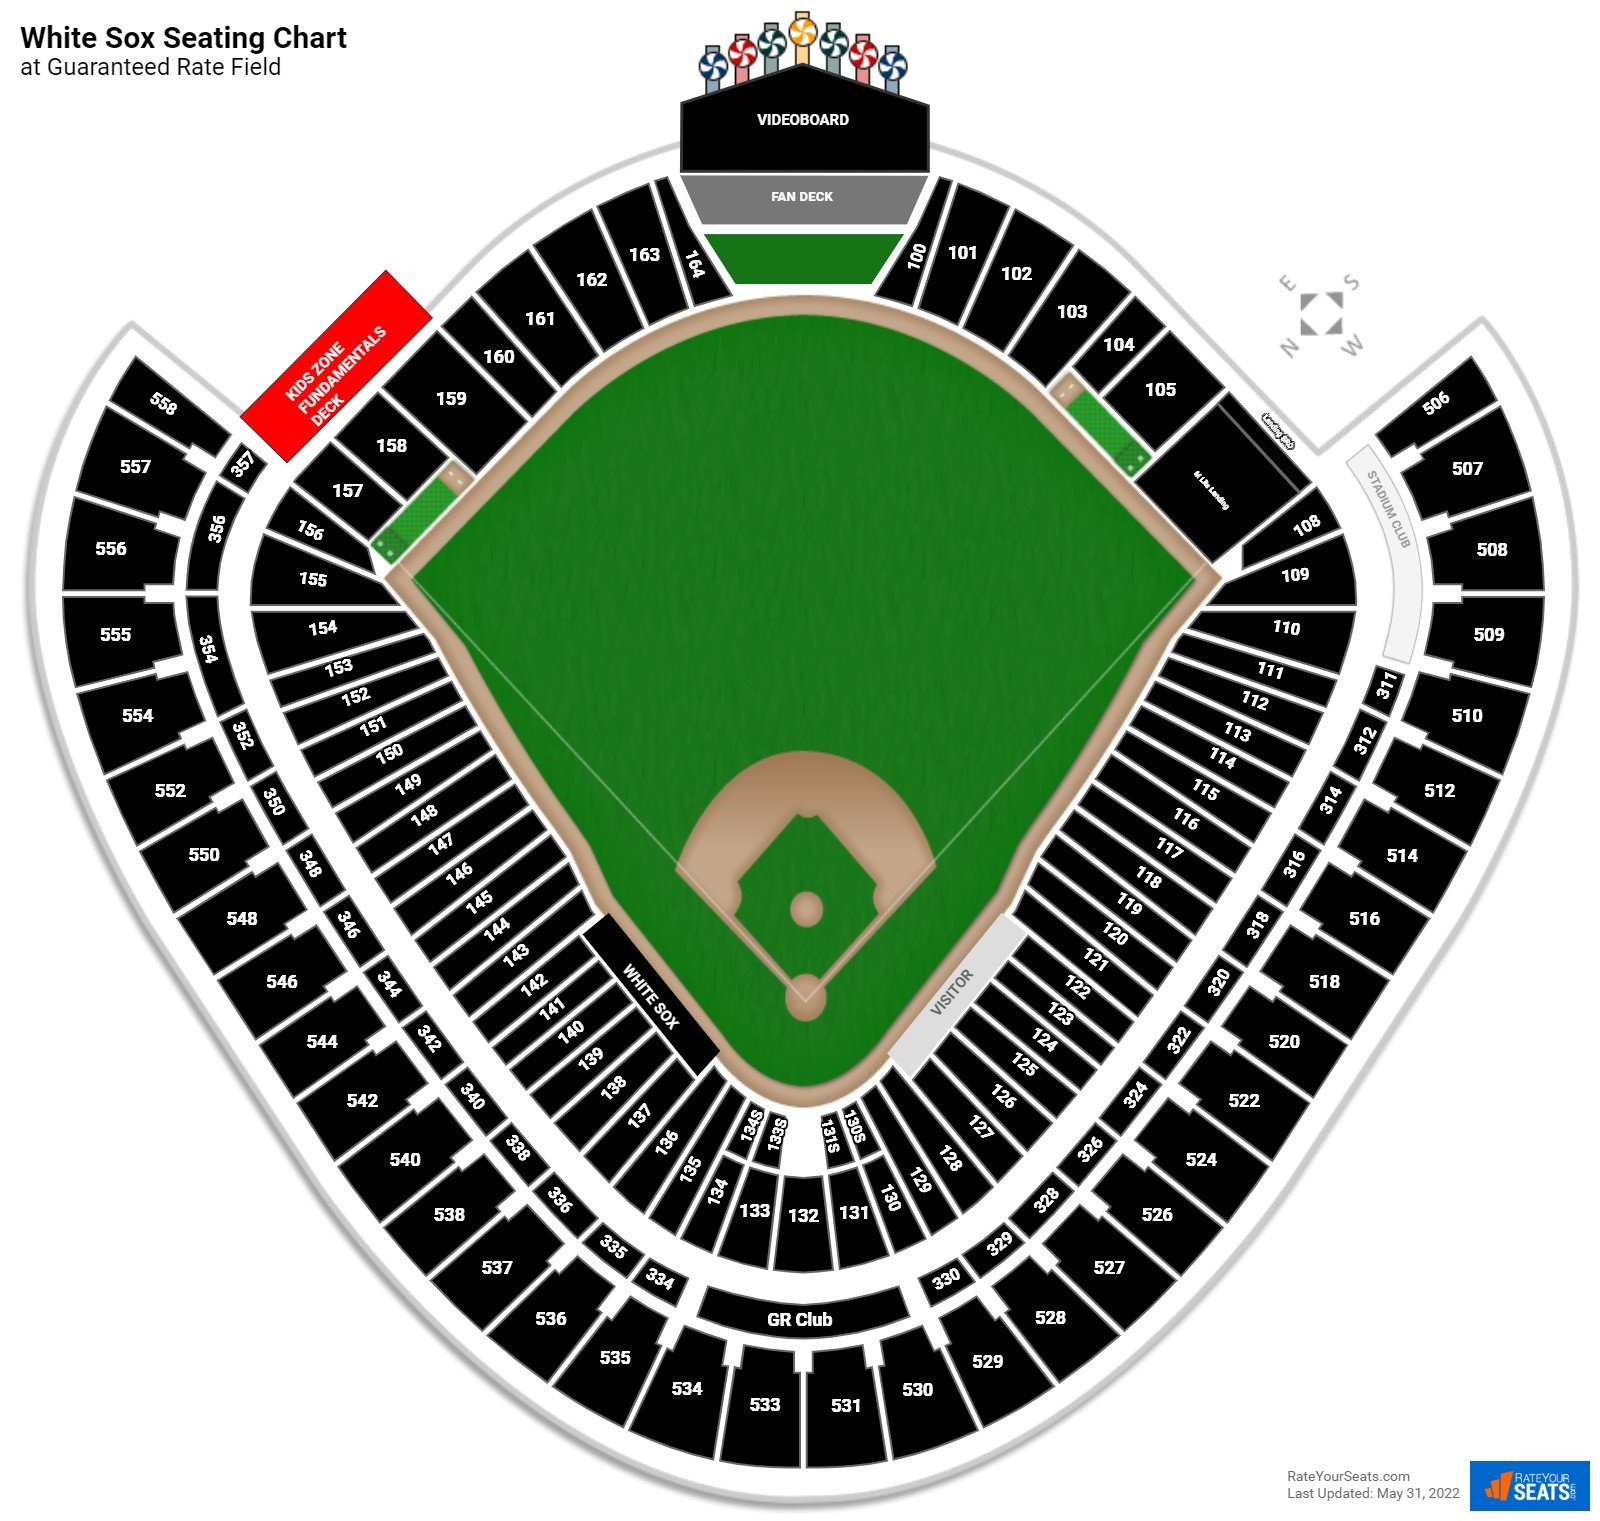 Chicago White Sox Seating Chart at Guaranteed Rate Field